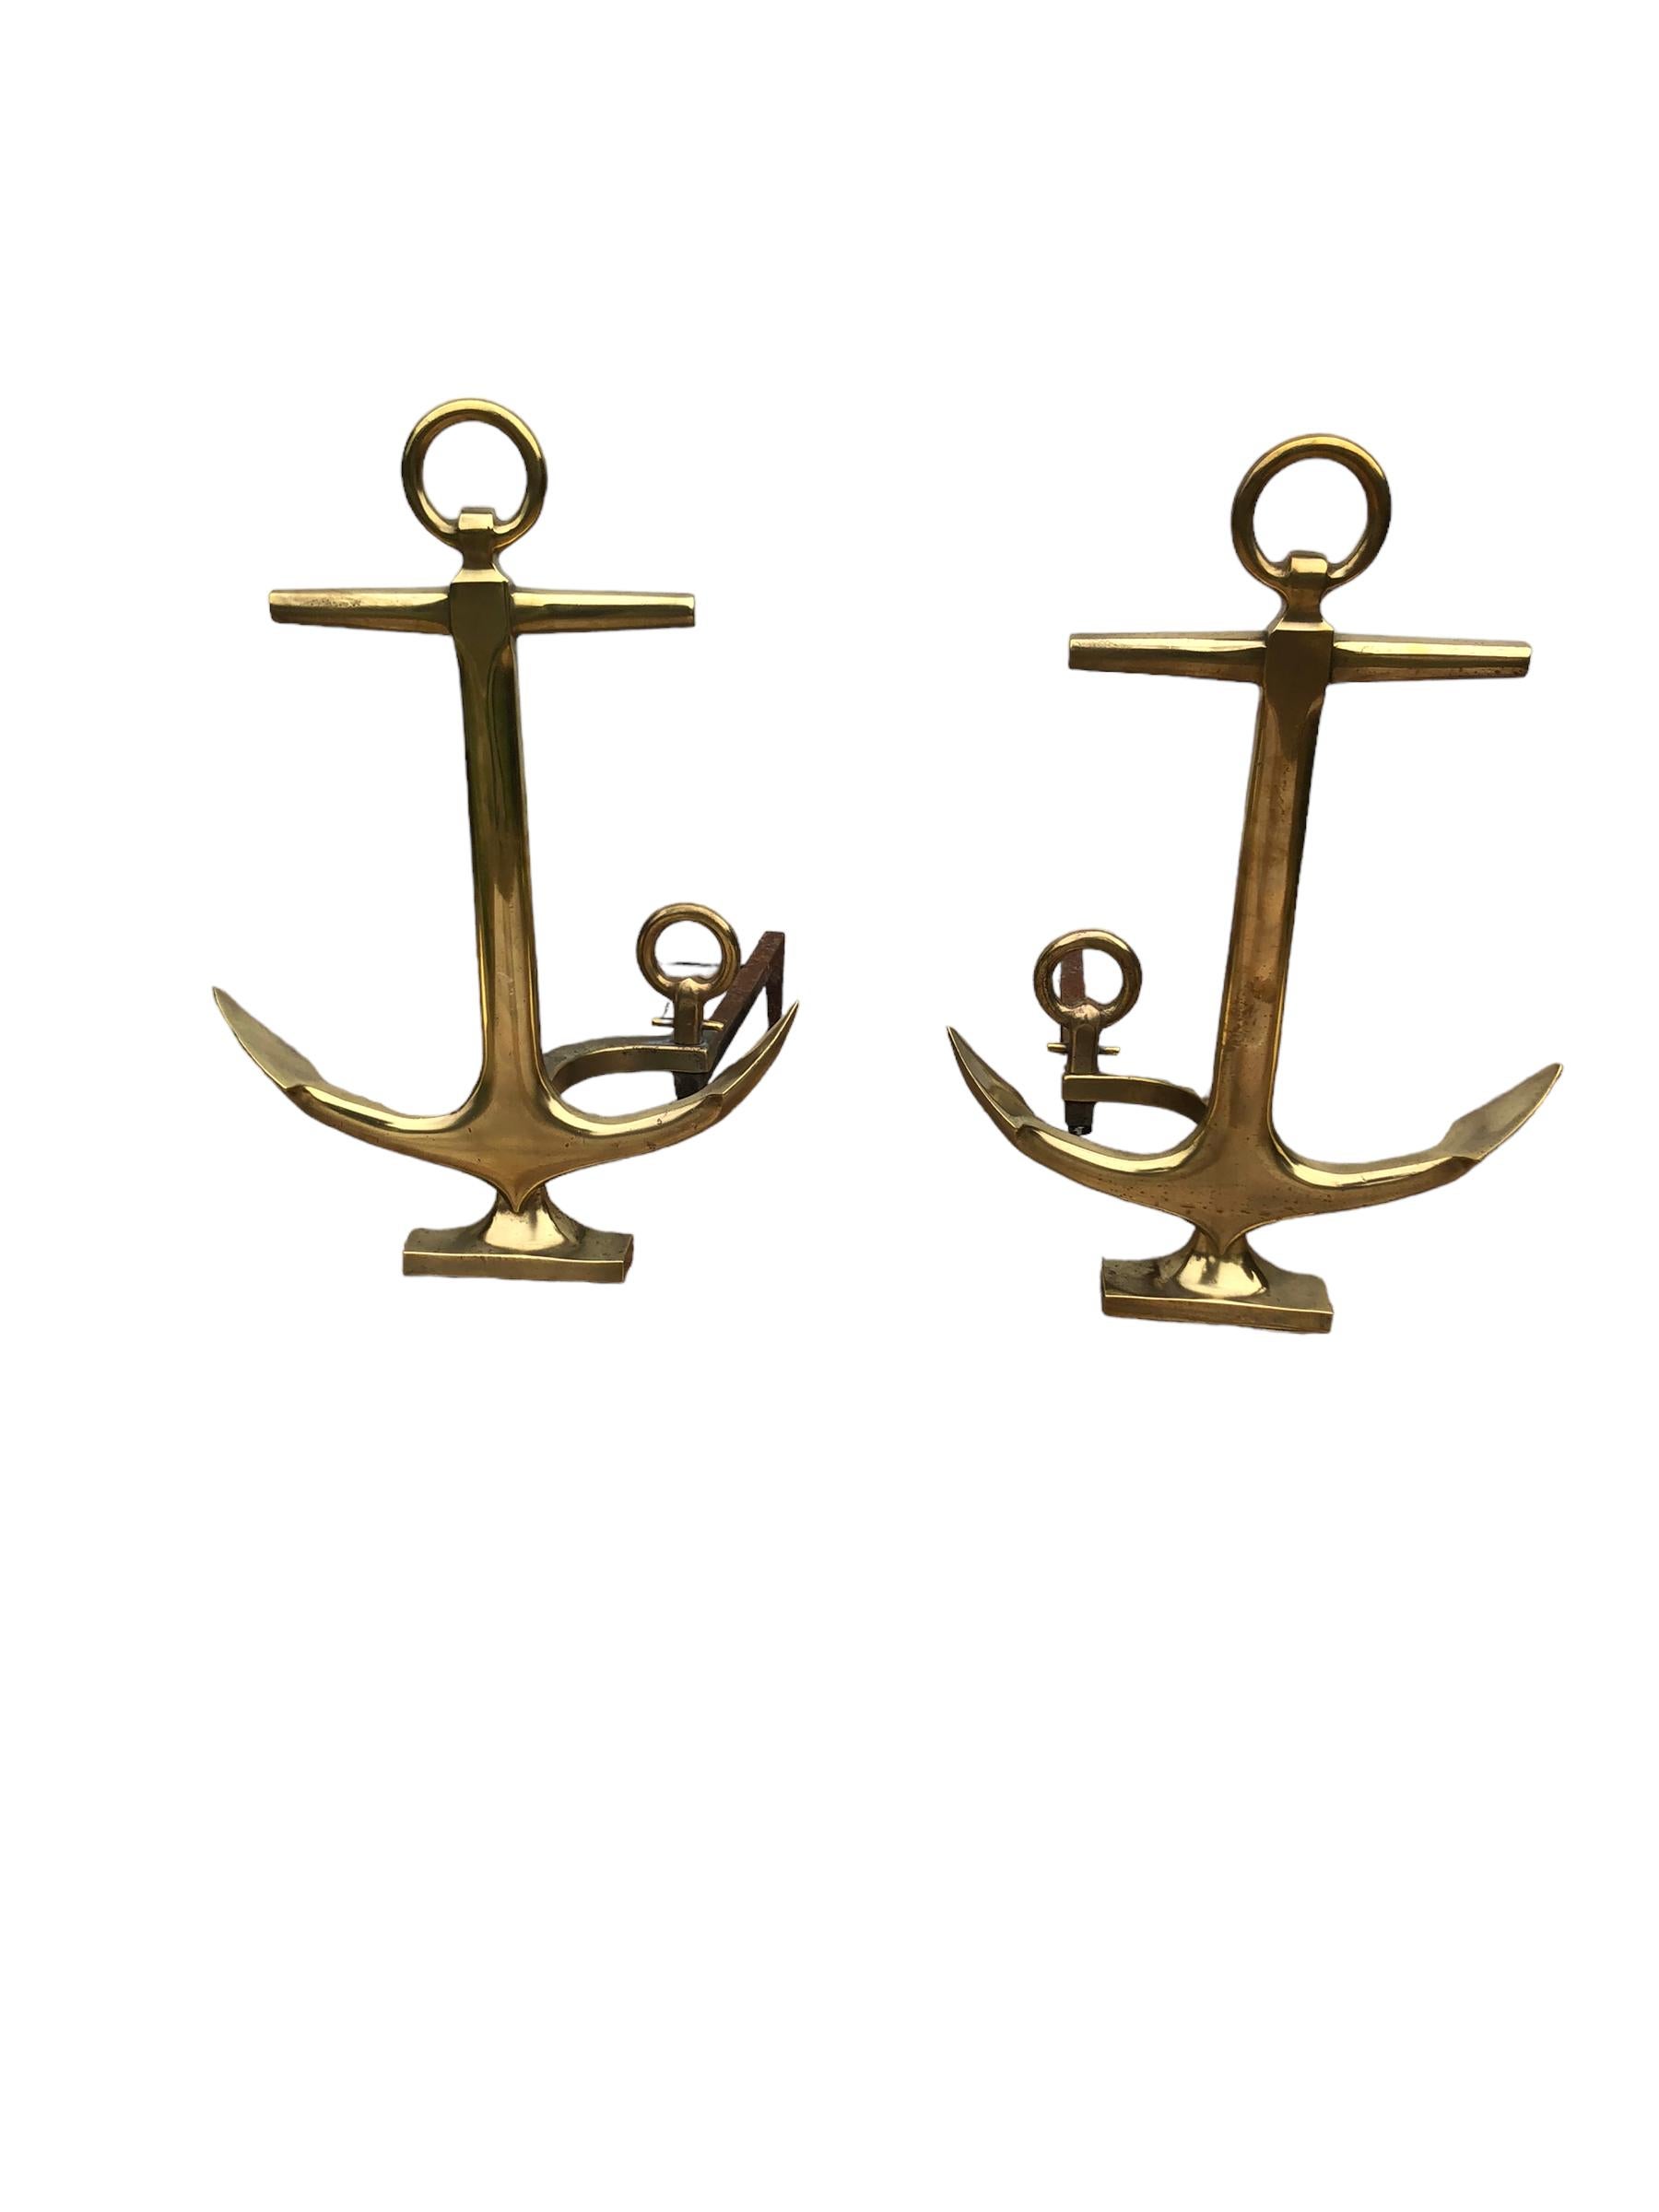 Pair of Solid Brass Anchor Andirons manufactured by Rostand of Milford, CT. Milford was a shipbuilding town so this pair of andirons fit the town perfectly.